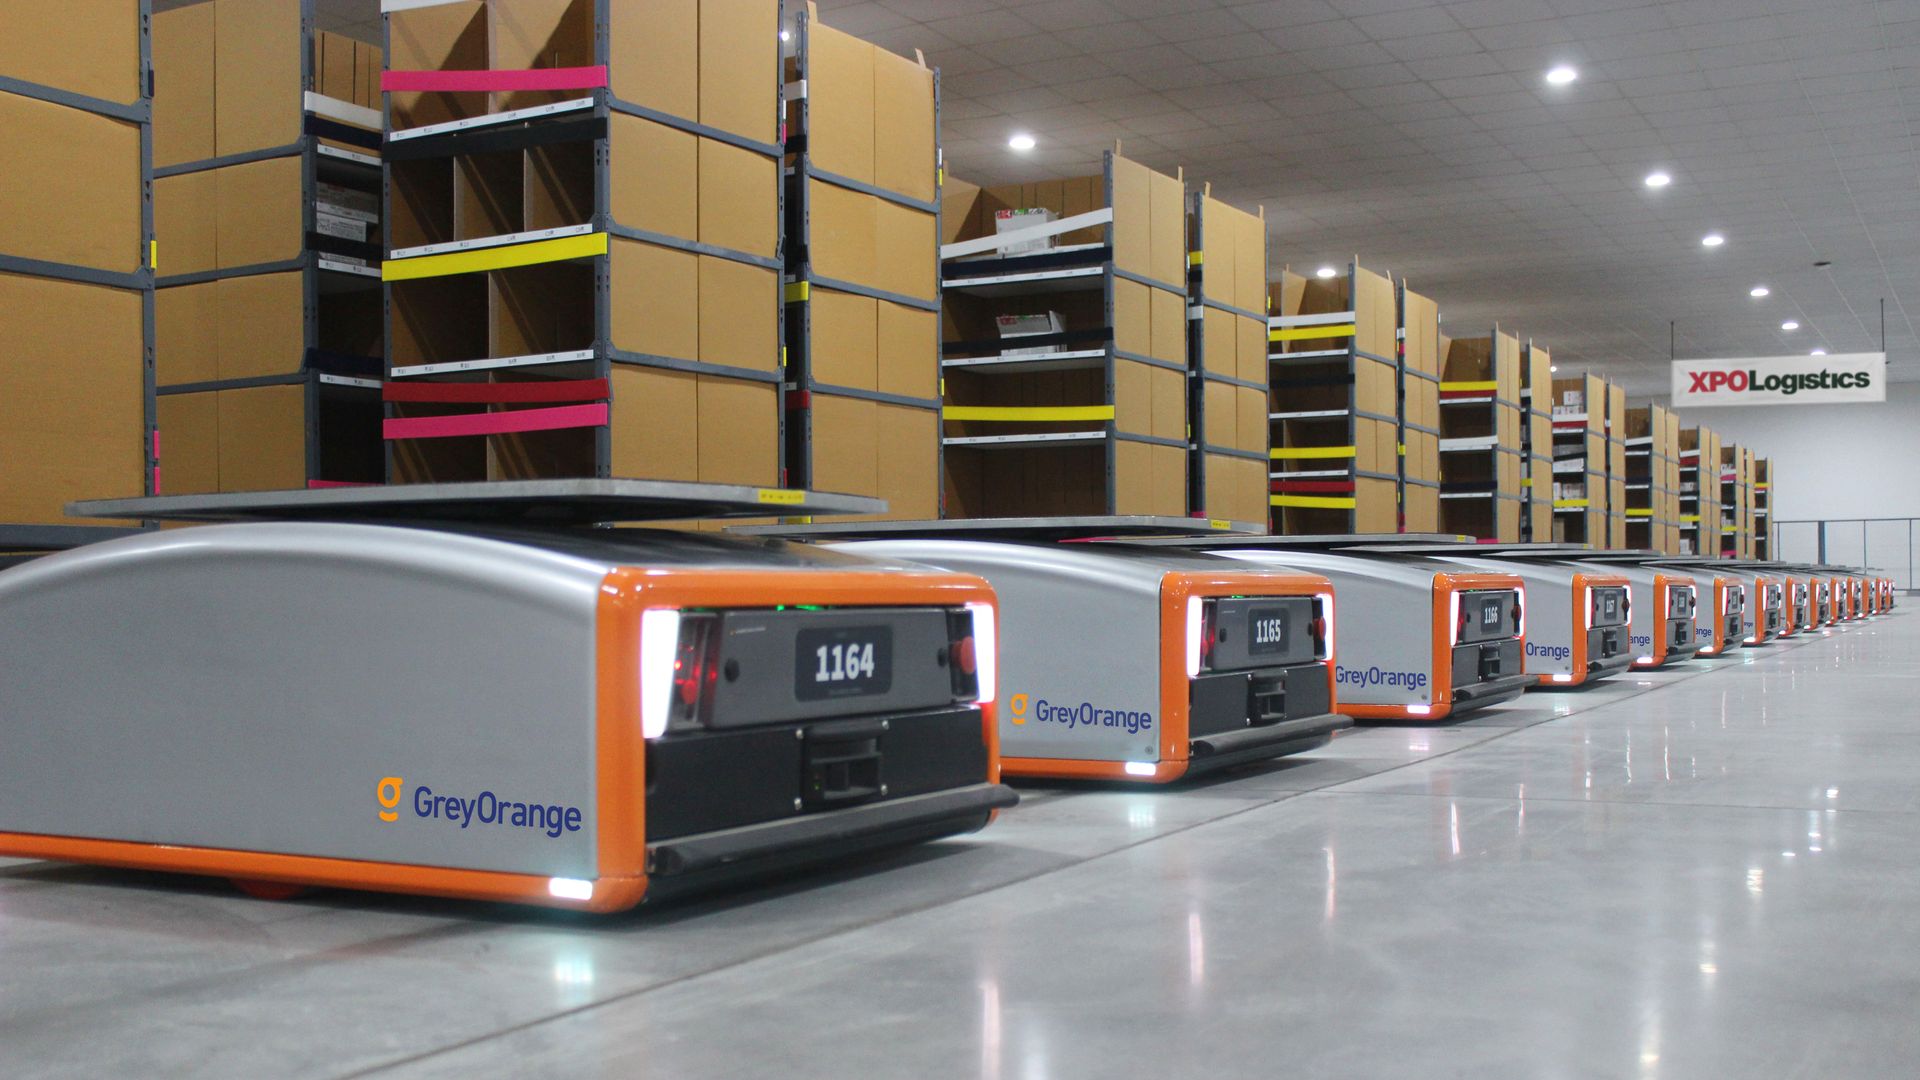 Line of robots in an XPO Logistics warehouse.